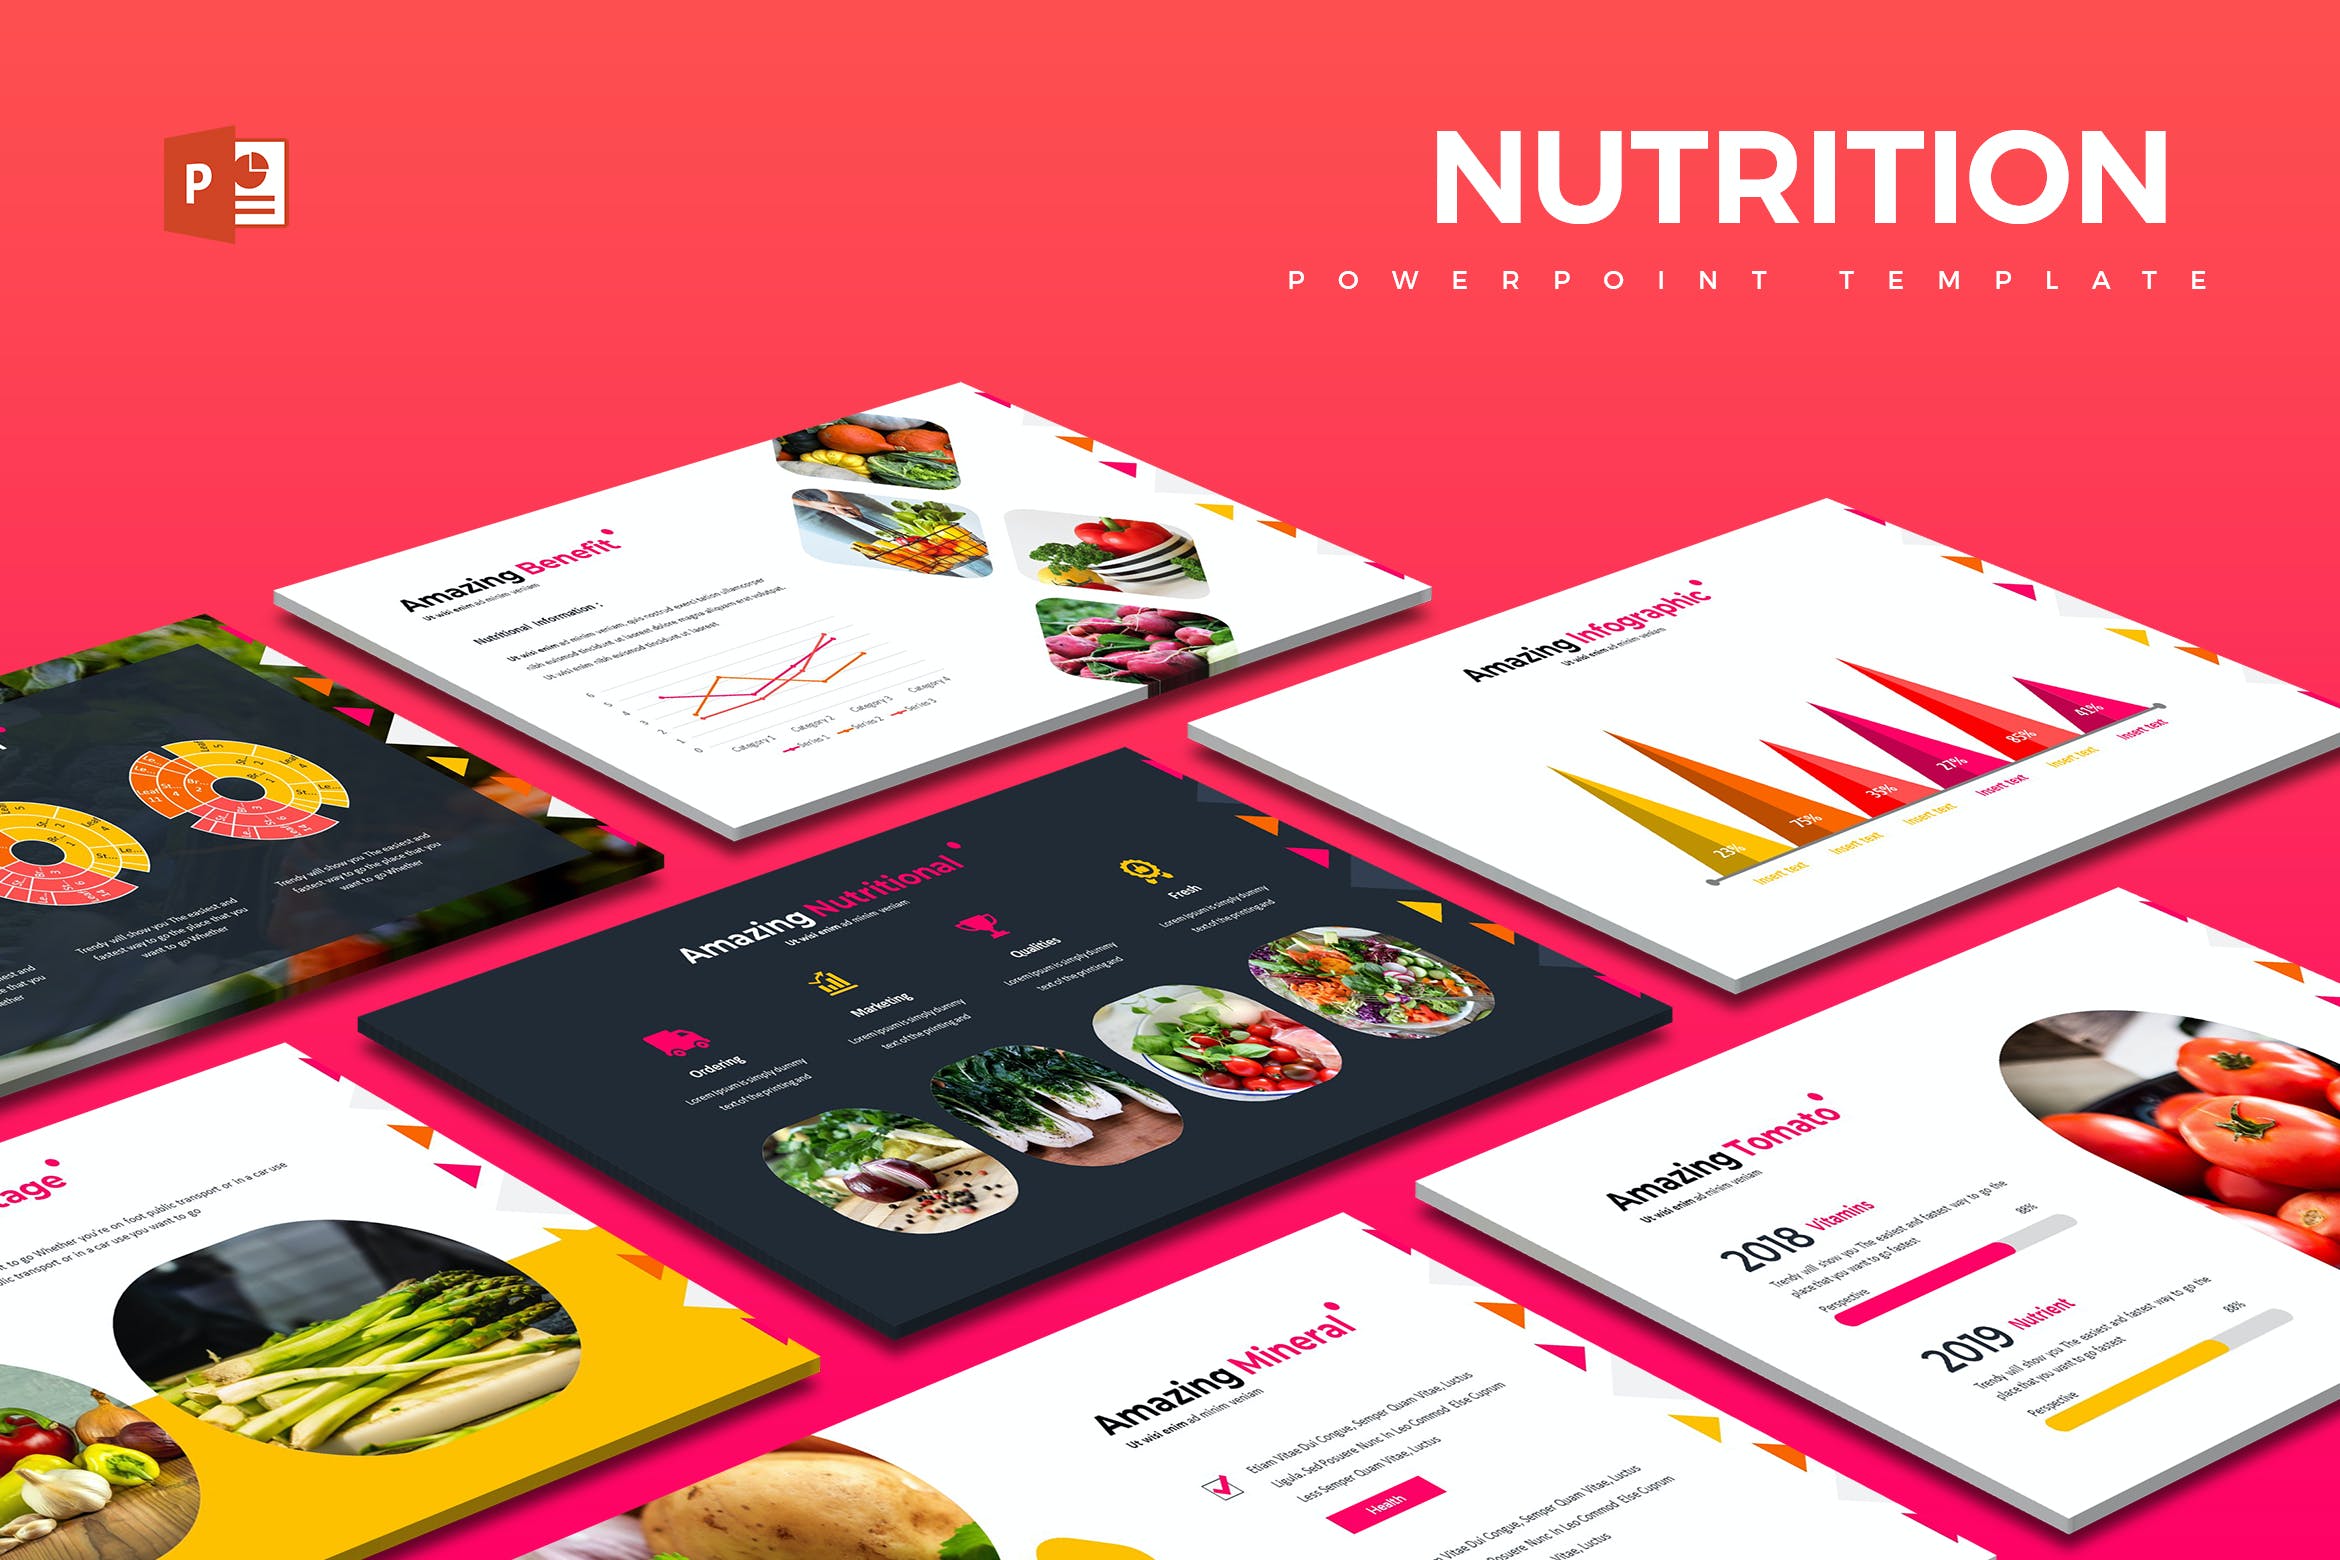 Cover image of Nutrition - Powerpoint Template.